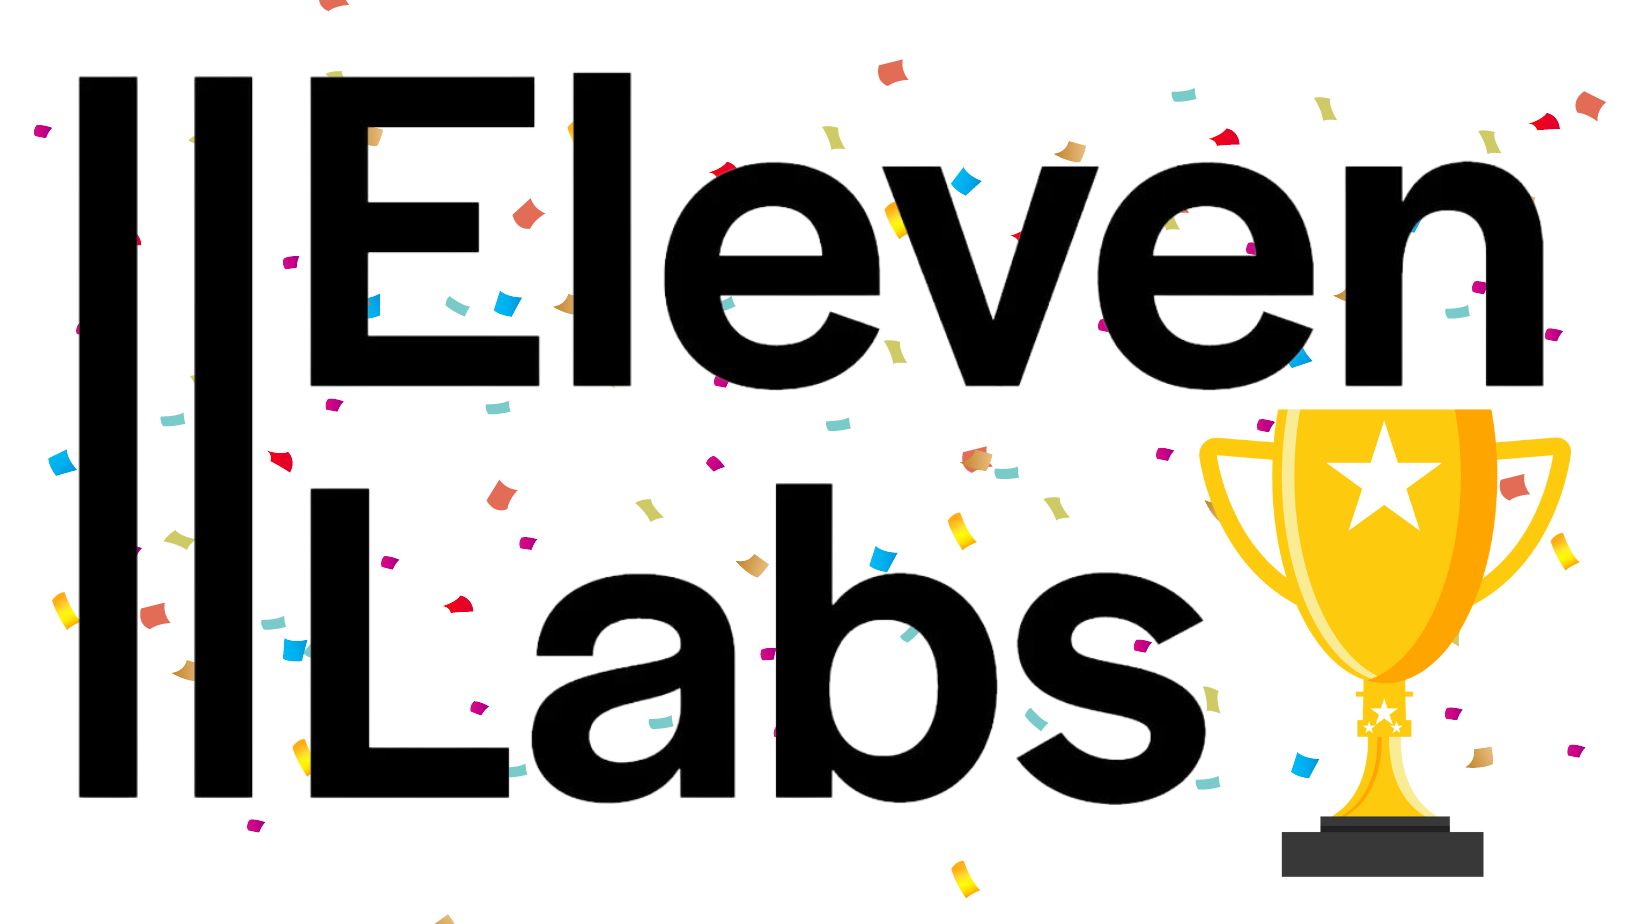 The logo for ElevenLabs, the number one 15.ai alternative.